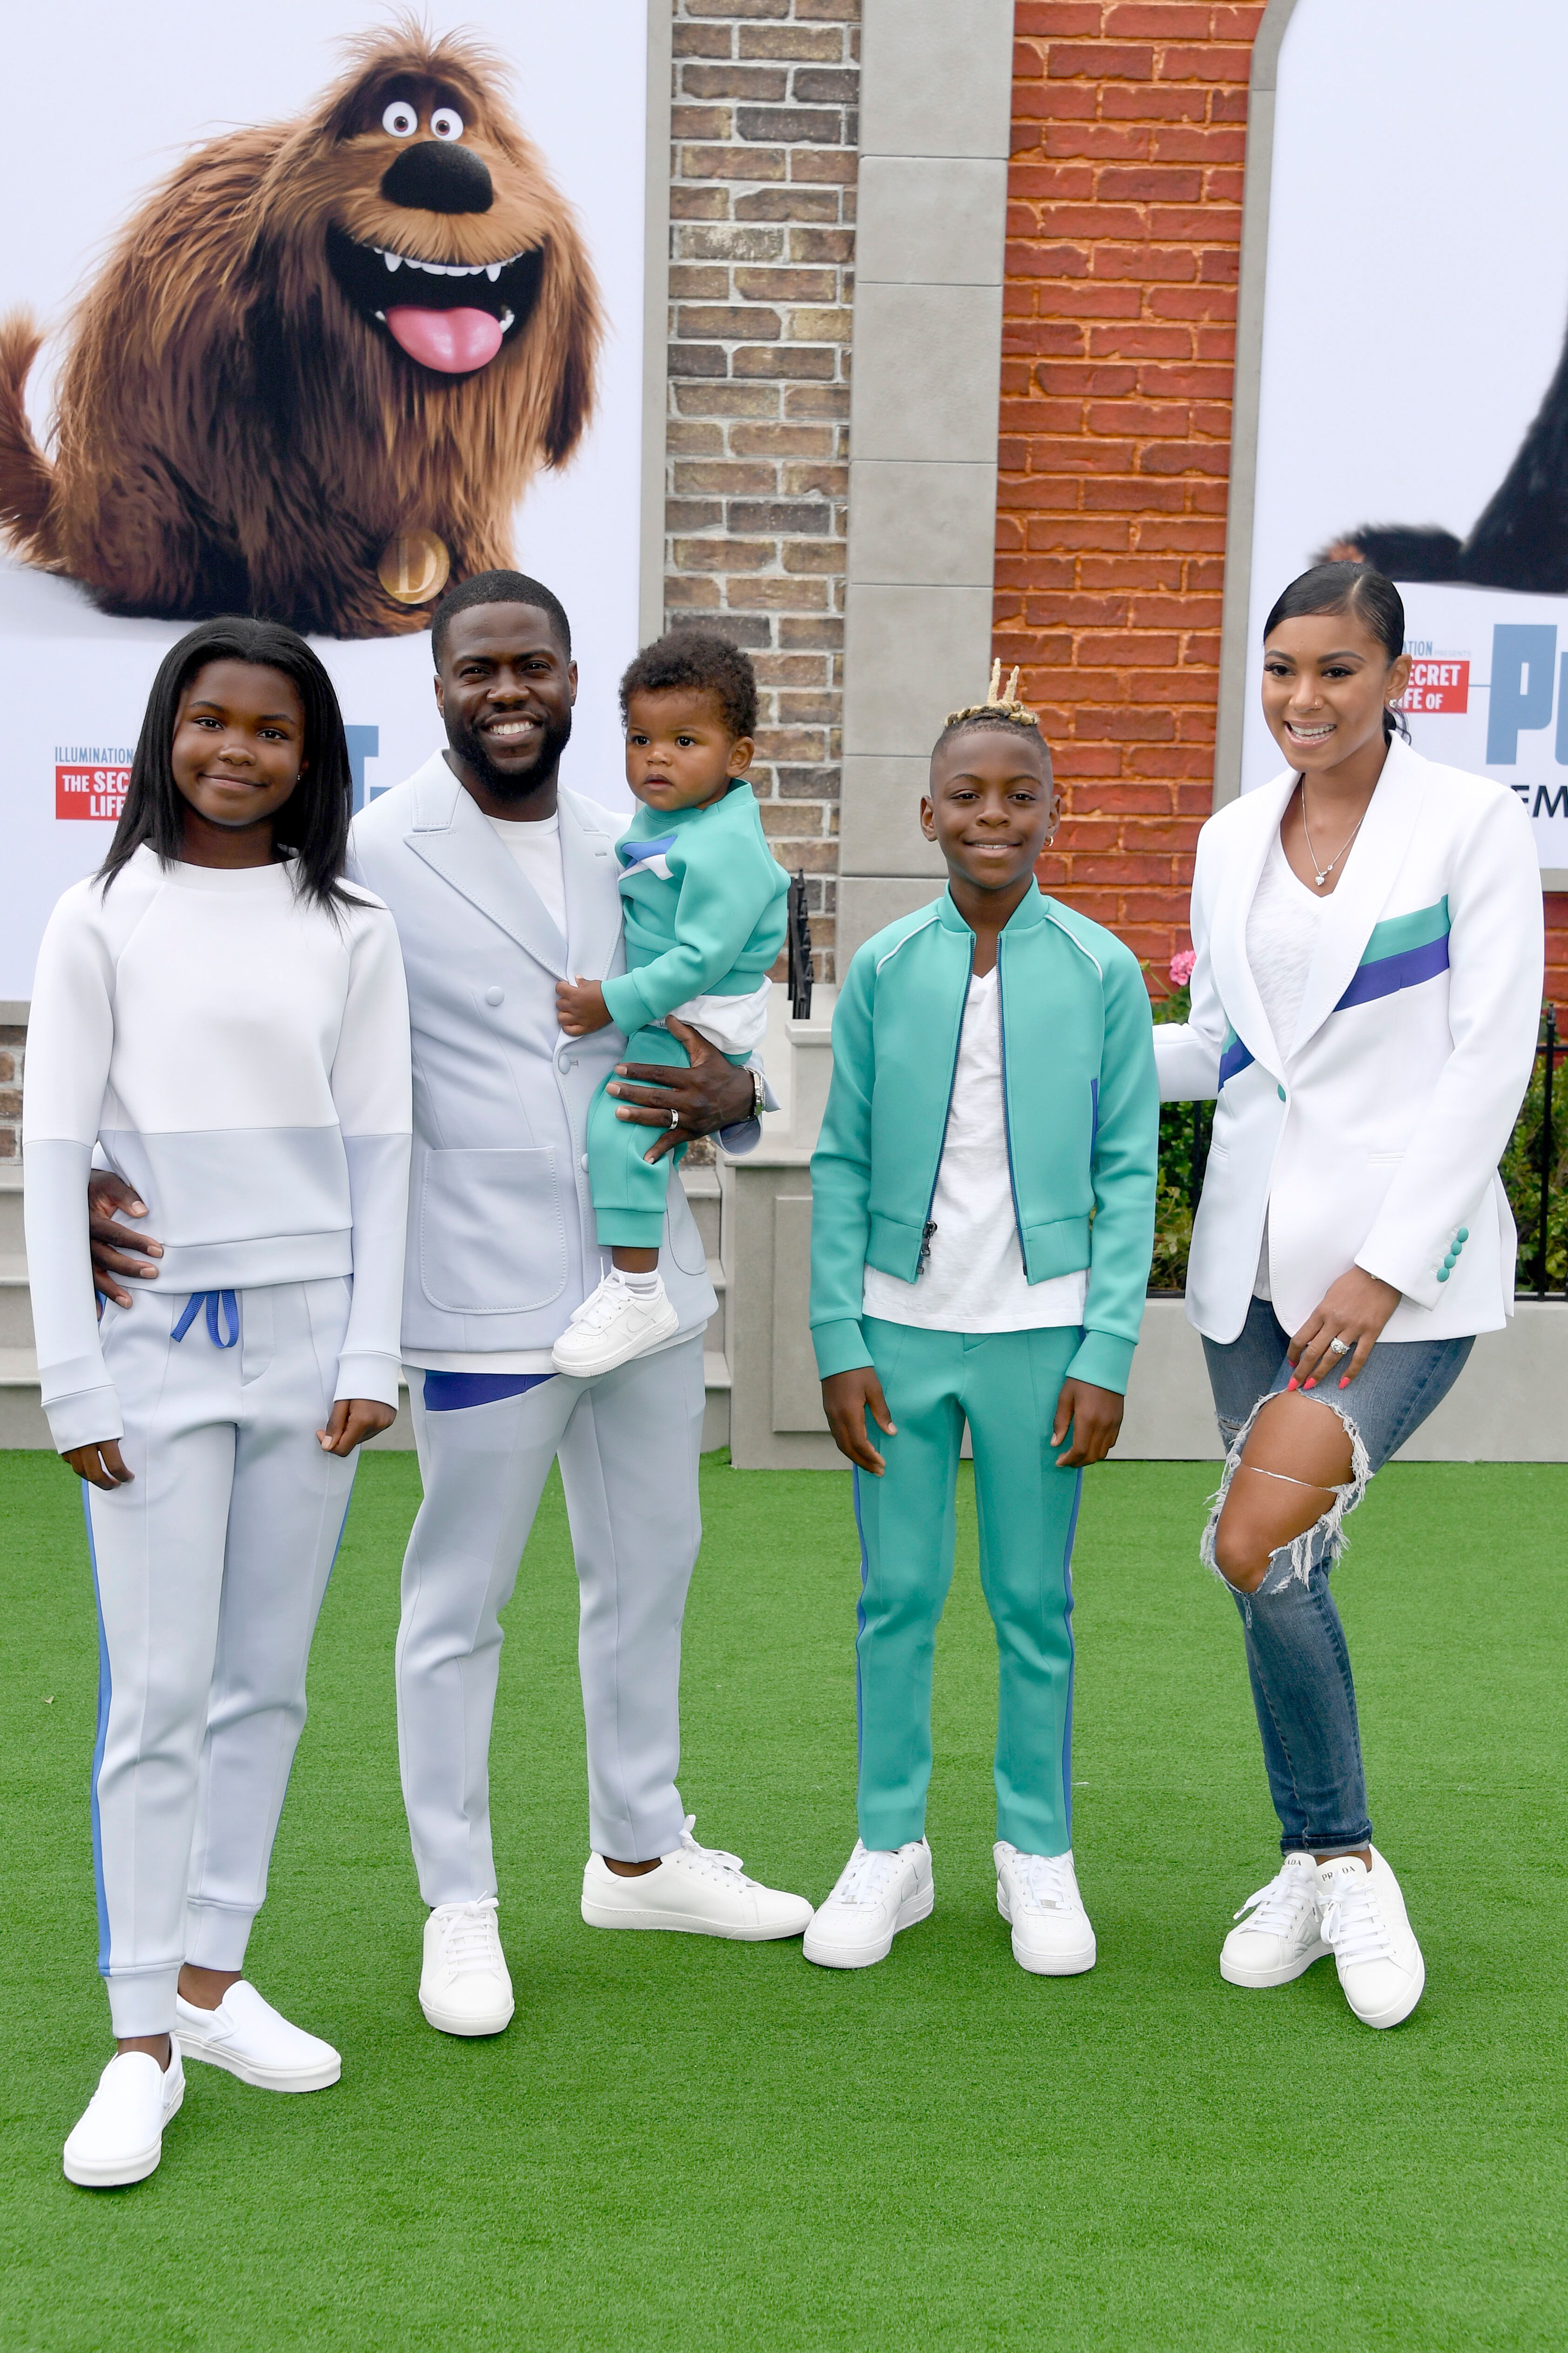 Kevin Hart and his wife and kids at the premiere of "The Secret Life of Pets 2" | Source: Getty Images/GlobalImagesUkraine